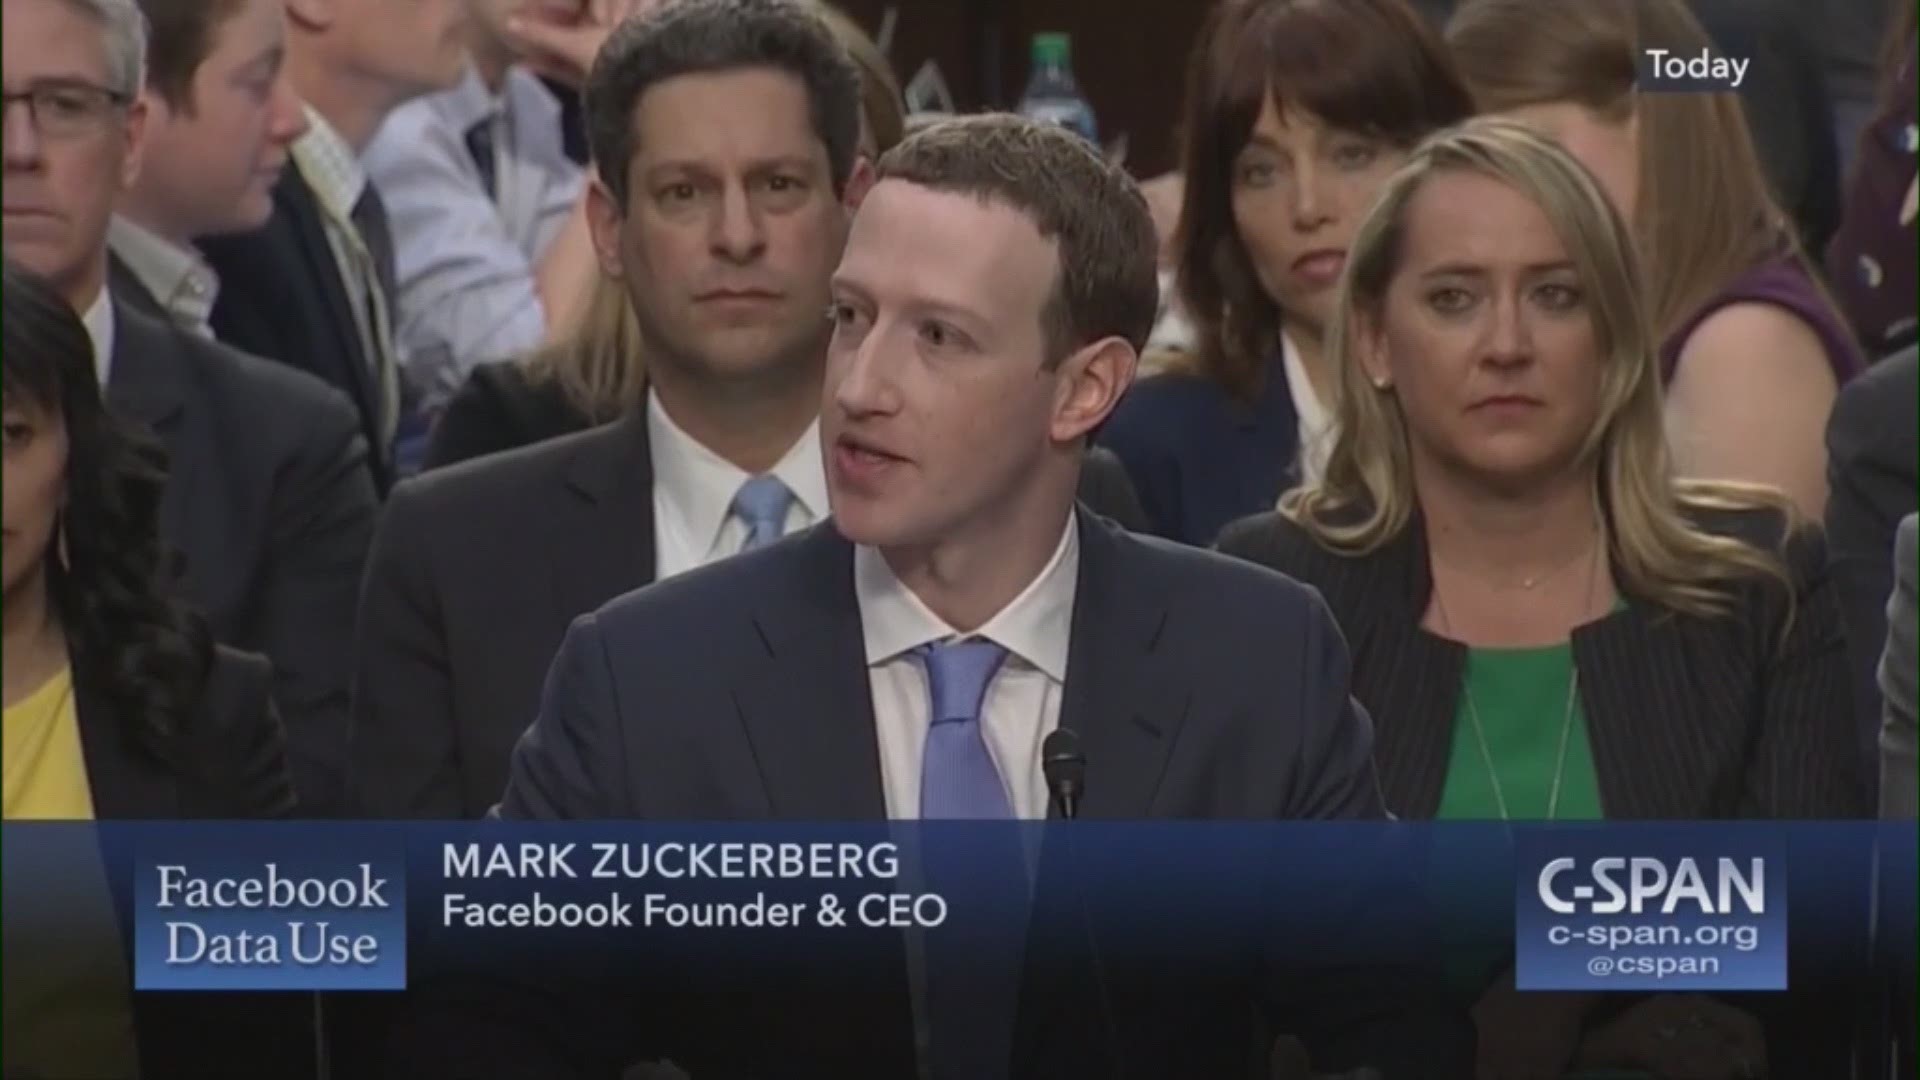 Testifying before Congress, Facebook CEO Mark Zuckerberg made a comment that suggests the company is contemplating a paid, and presumably ad-free, version of the social media platform. Daily Blast LIVE discusses the downfall of this dominant platform and 